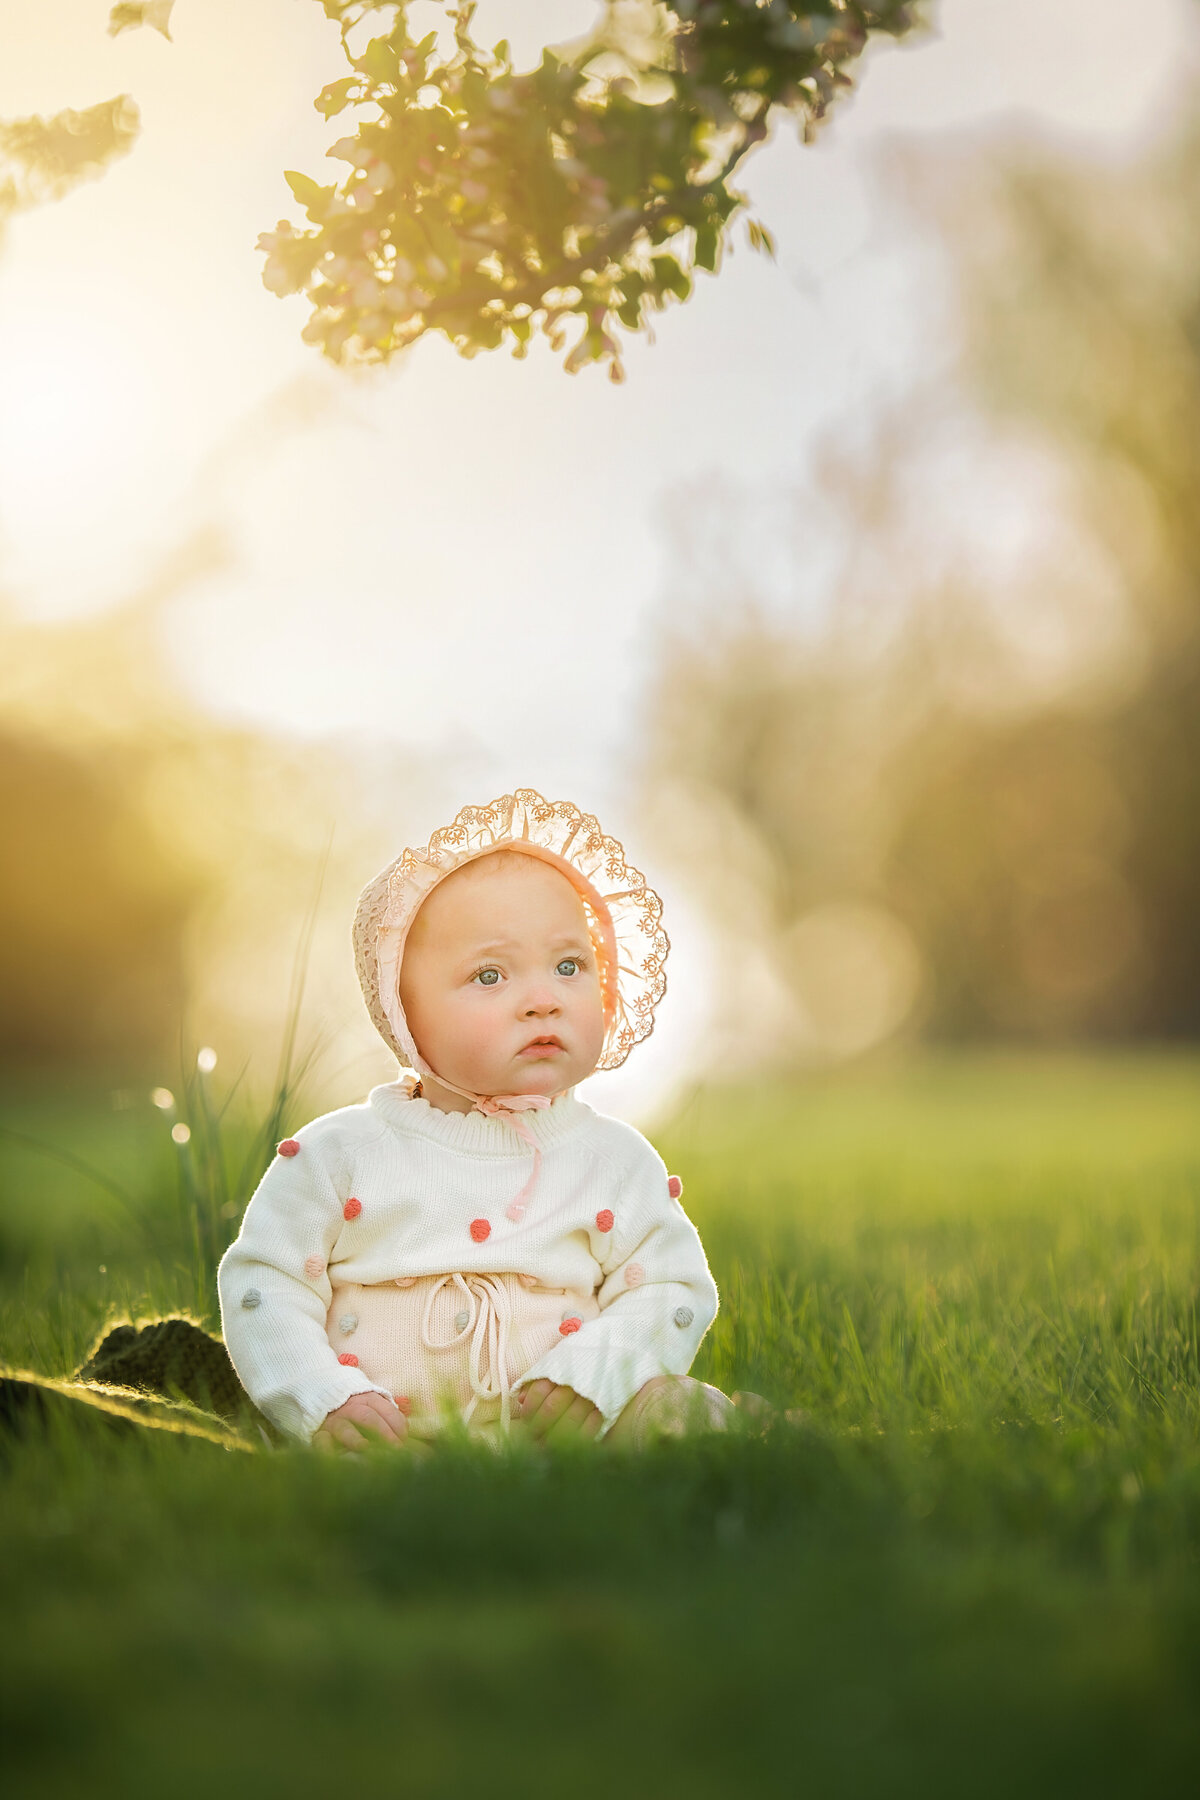 Baby with cute bonnet glowing in golden hour light in the springtime